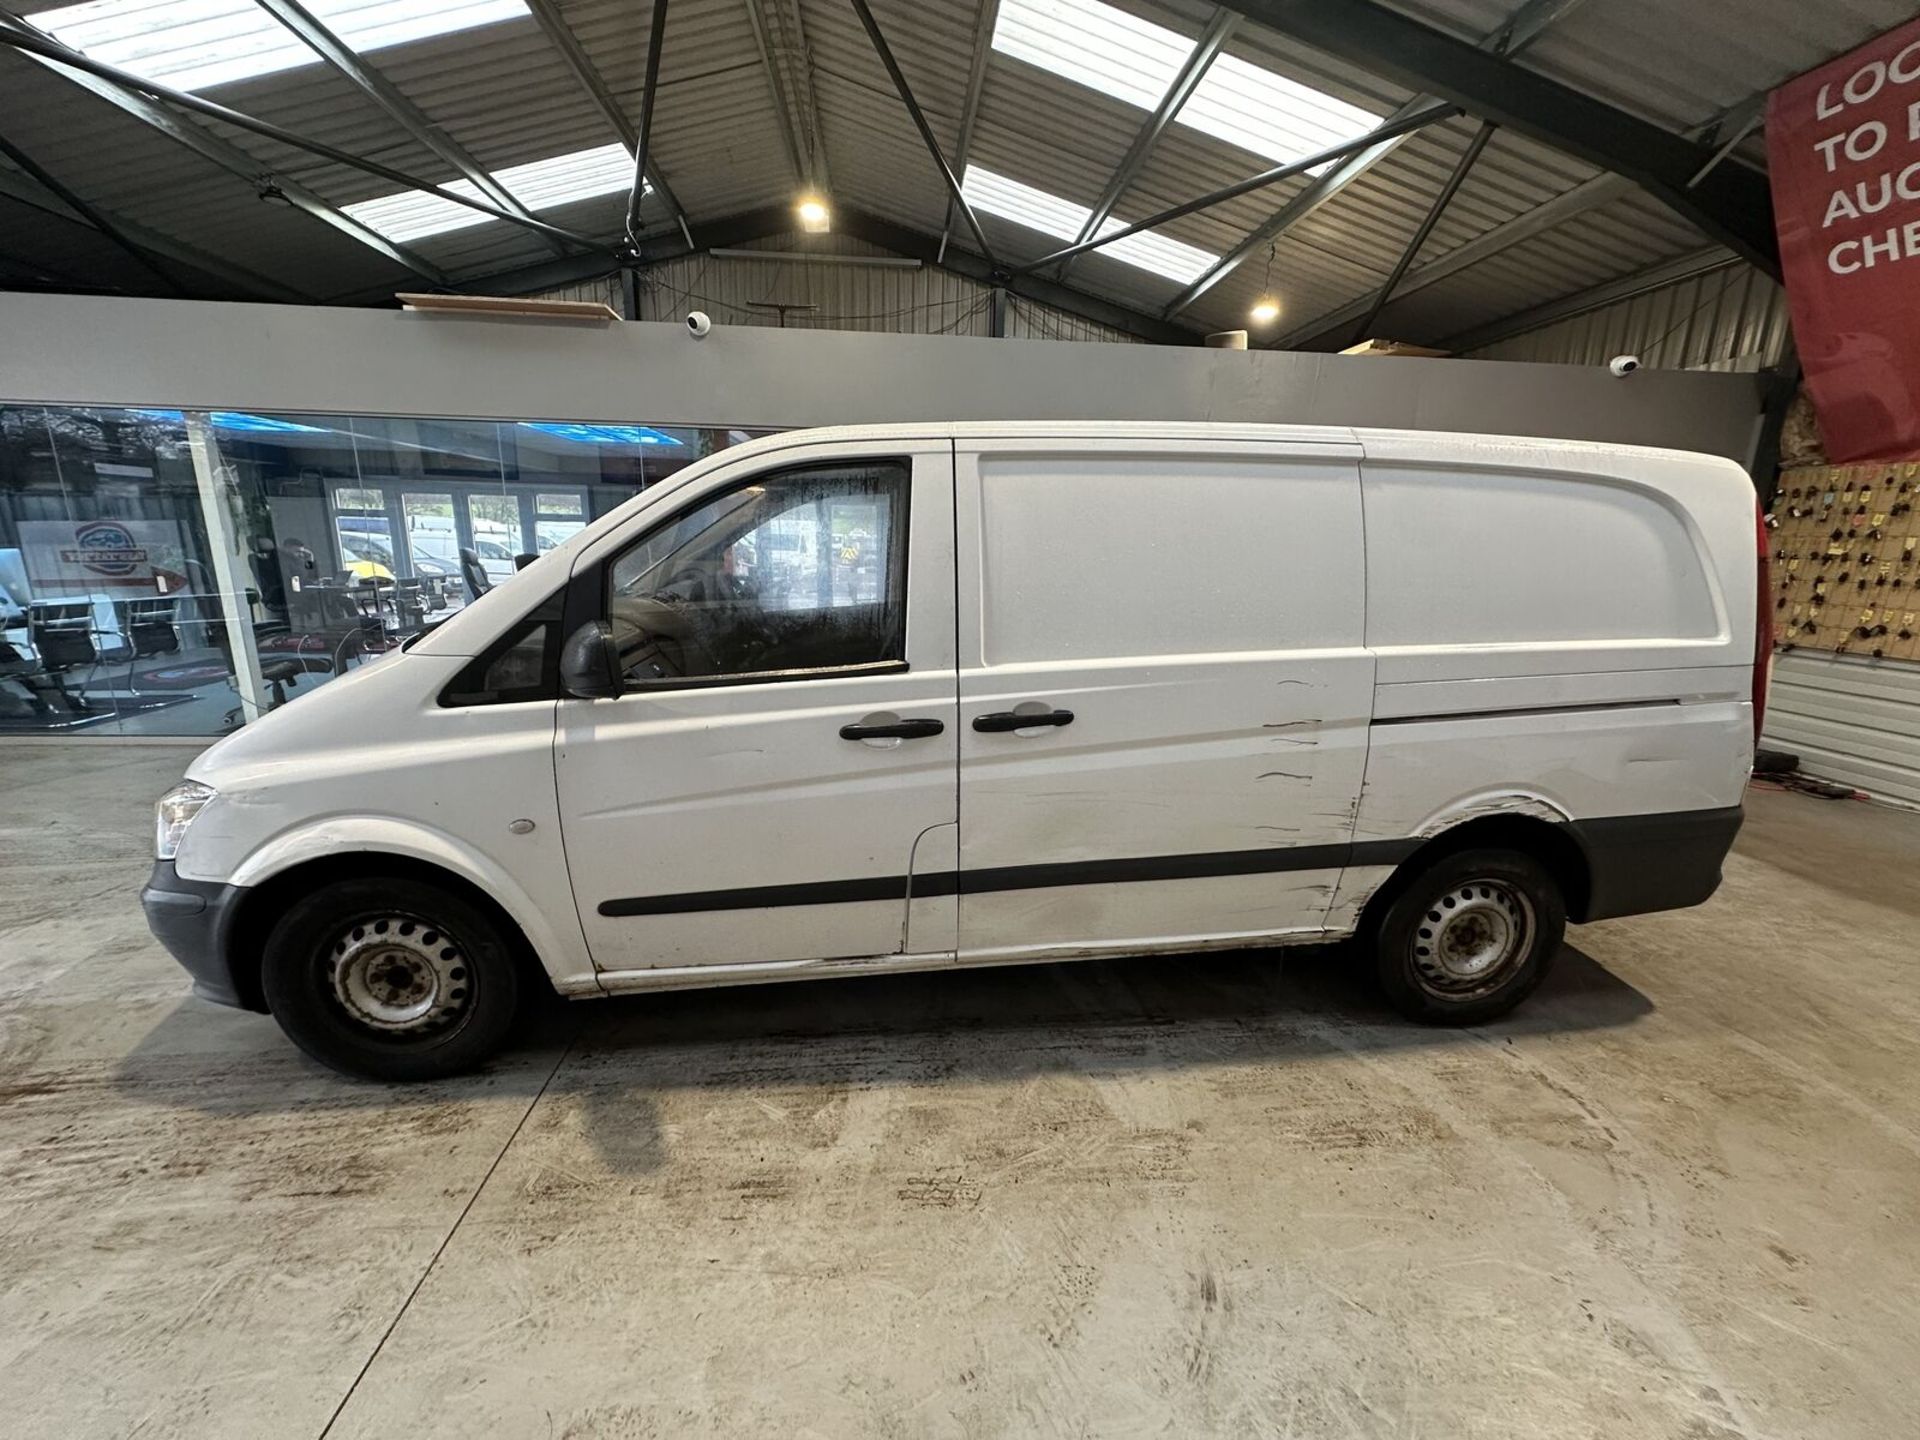 64 PLATE MERCEDES BENZ VITO LONG 2.2 CDI 1 OWNER - NO VAT ON HAMMER